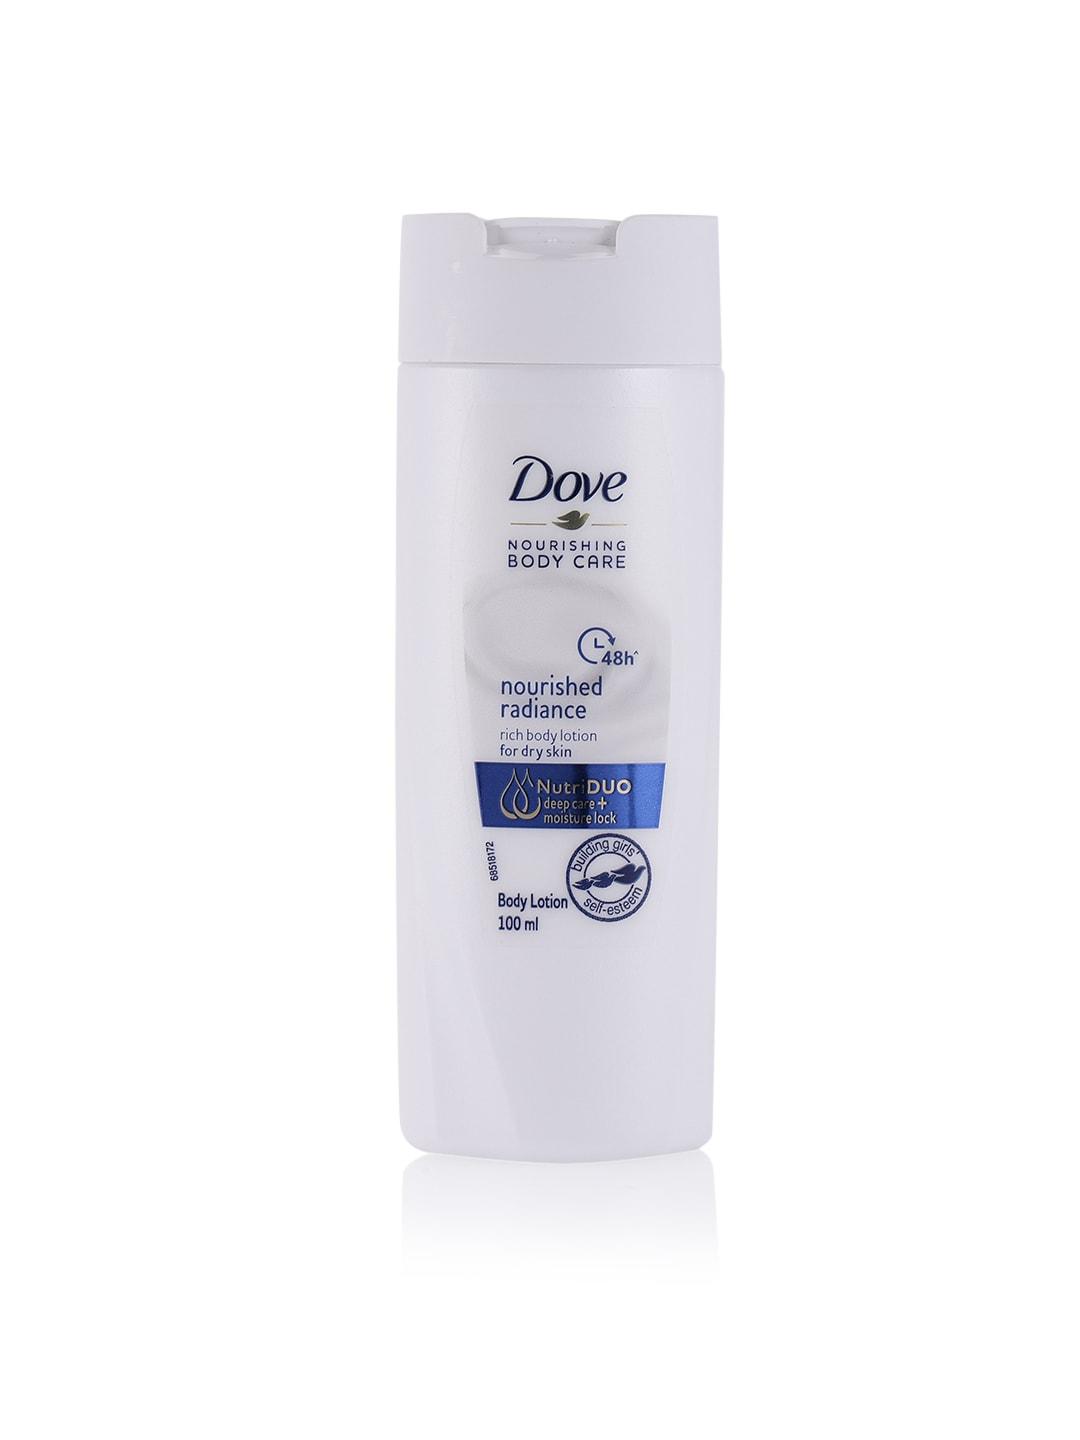 dove body love nutri duo nourished radiance paraben free body lotion 100 ml